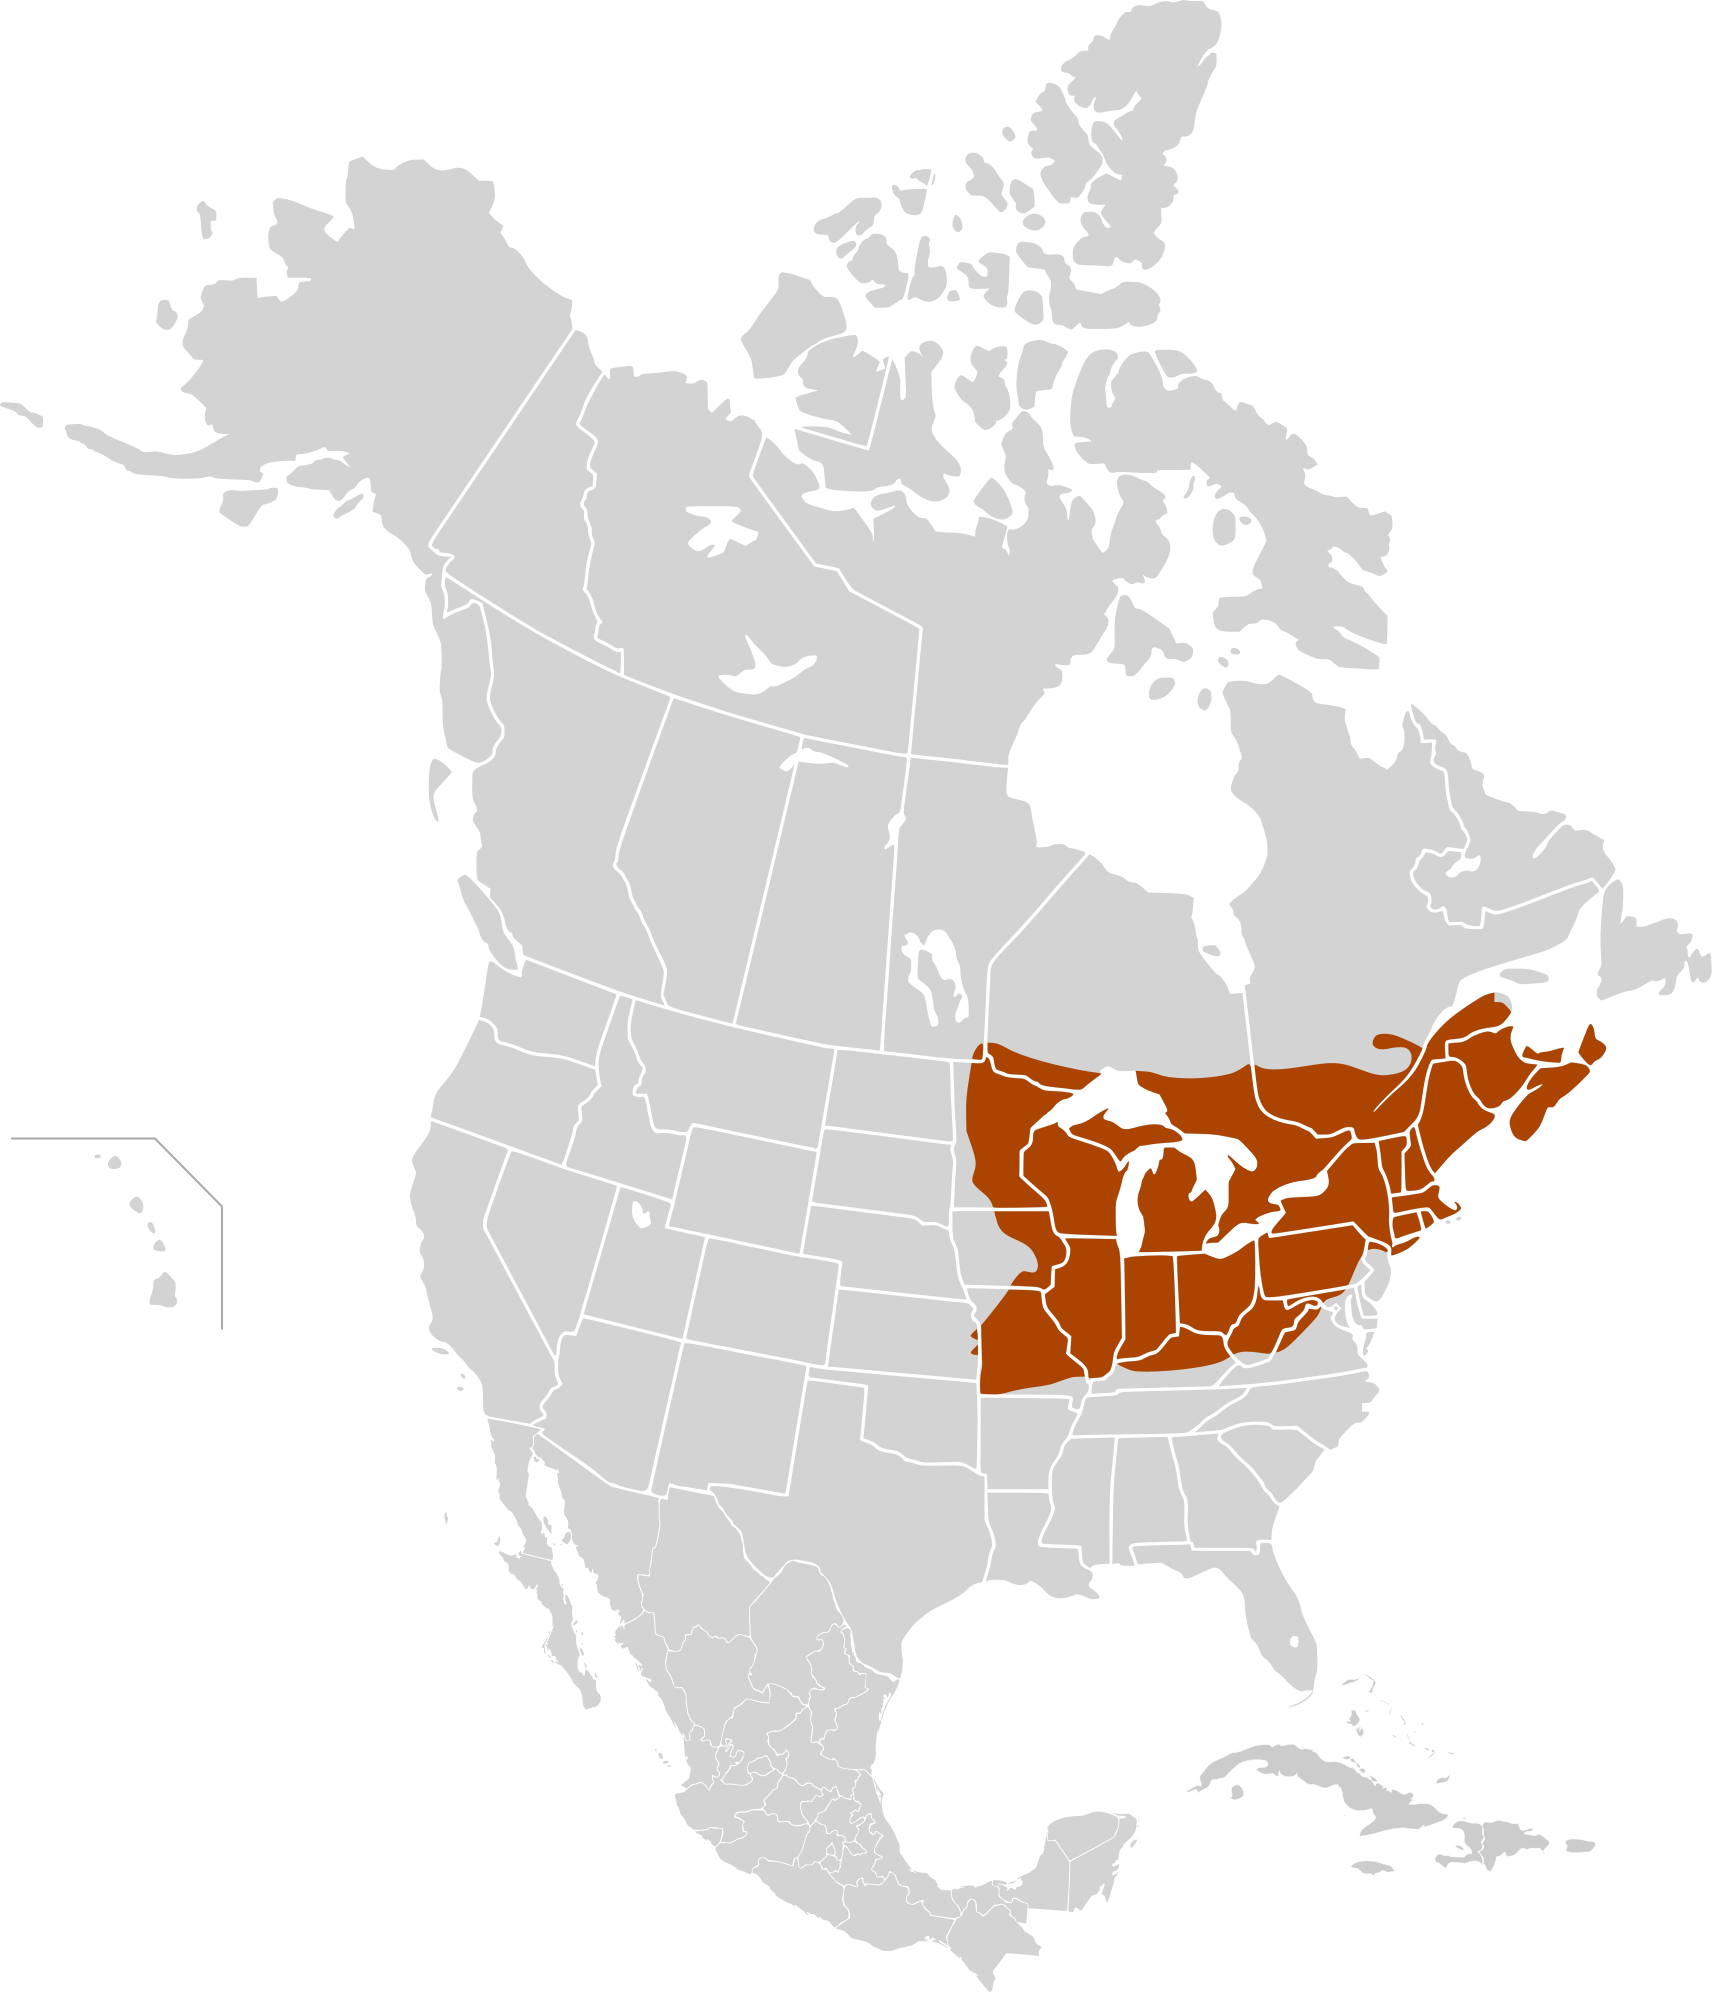 Map of maple syrup producing regions in Canada and the U.S.